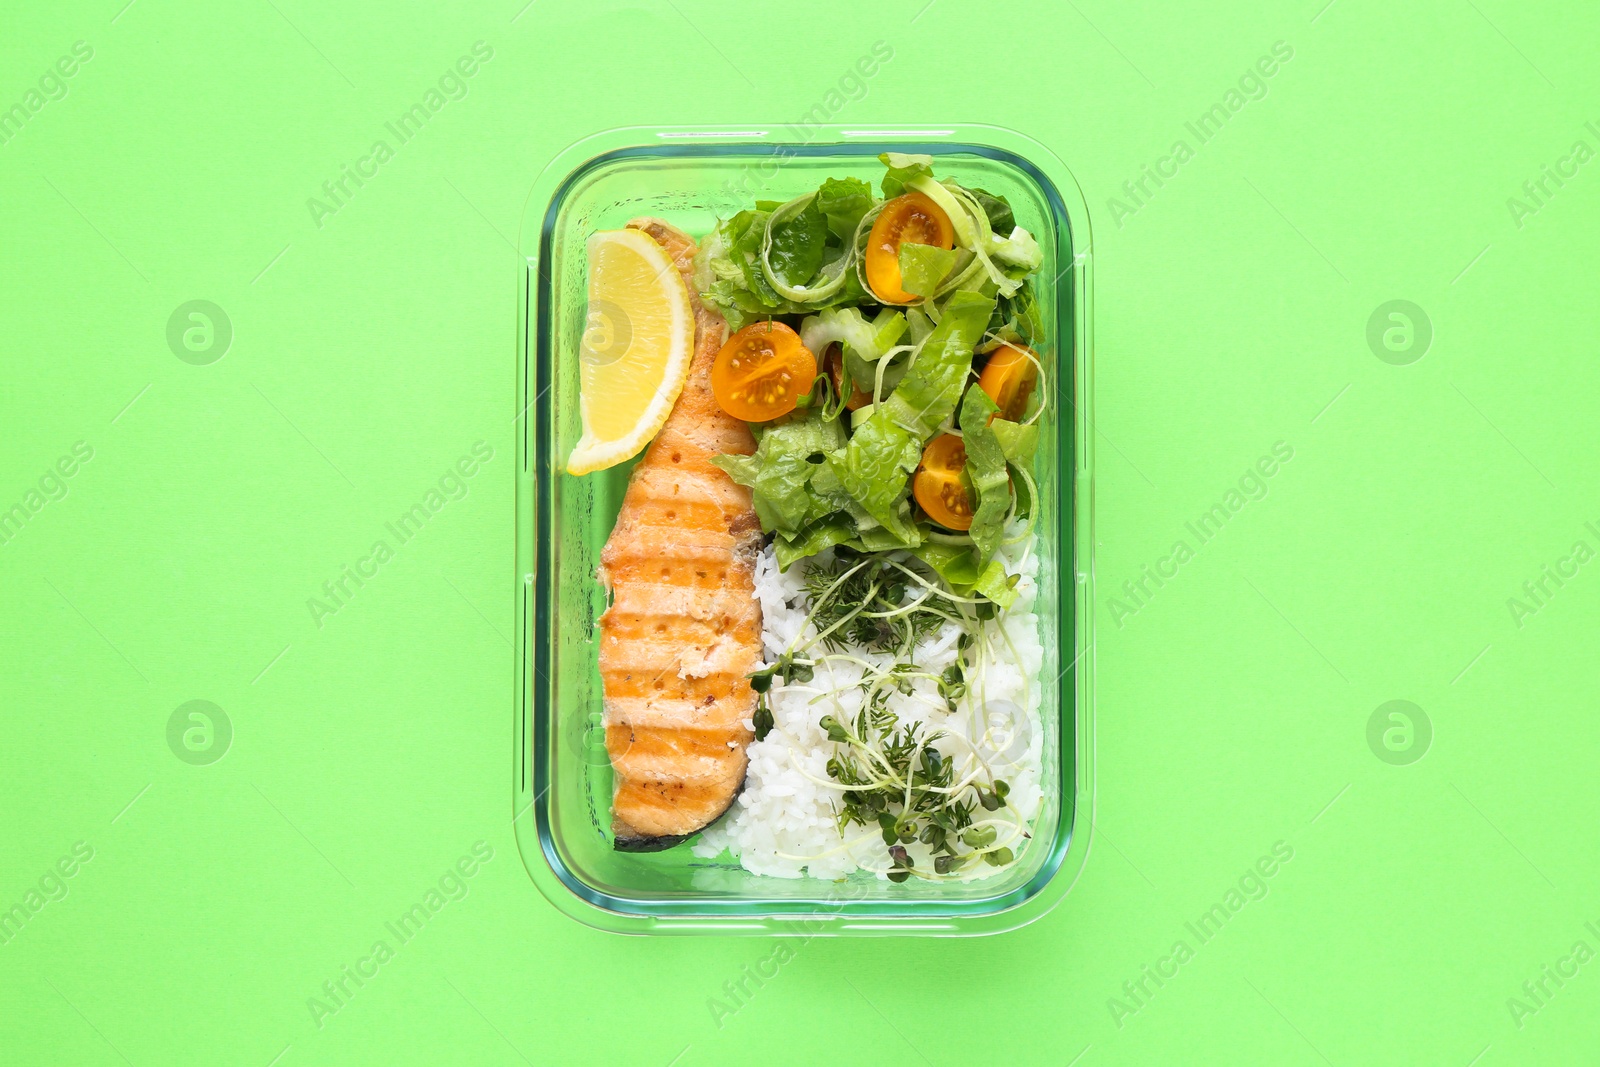 Photo of Healthy meal. Fresh salad, salmon and rice in glass container on green background, top view